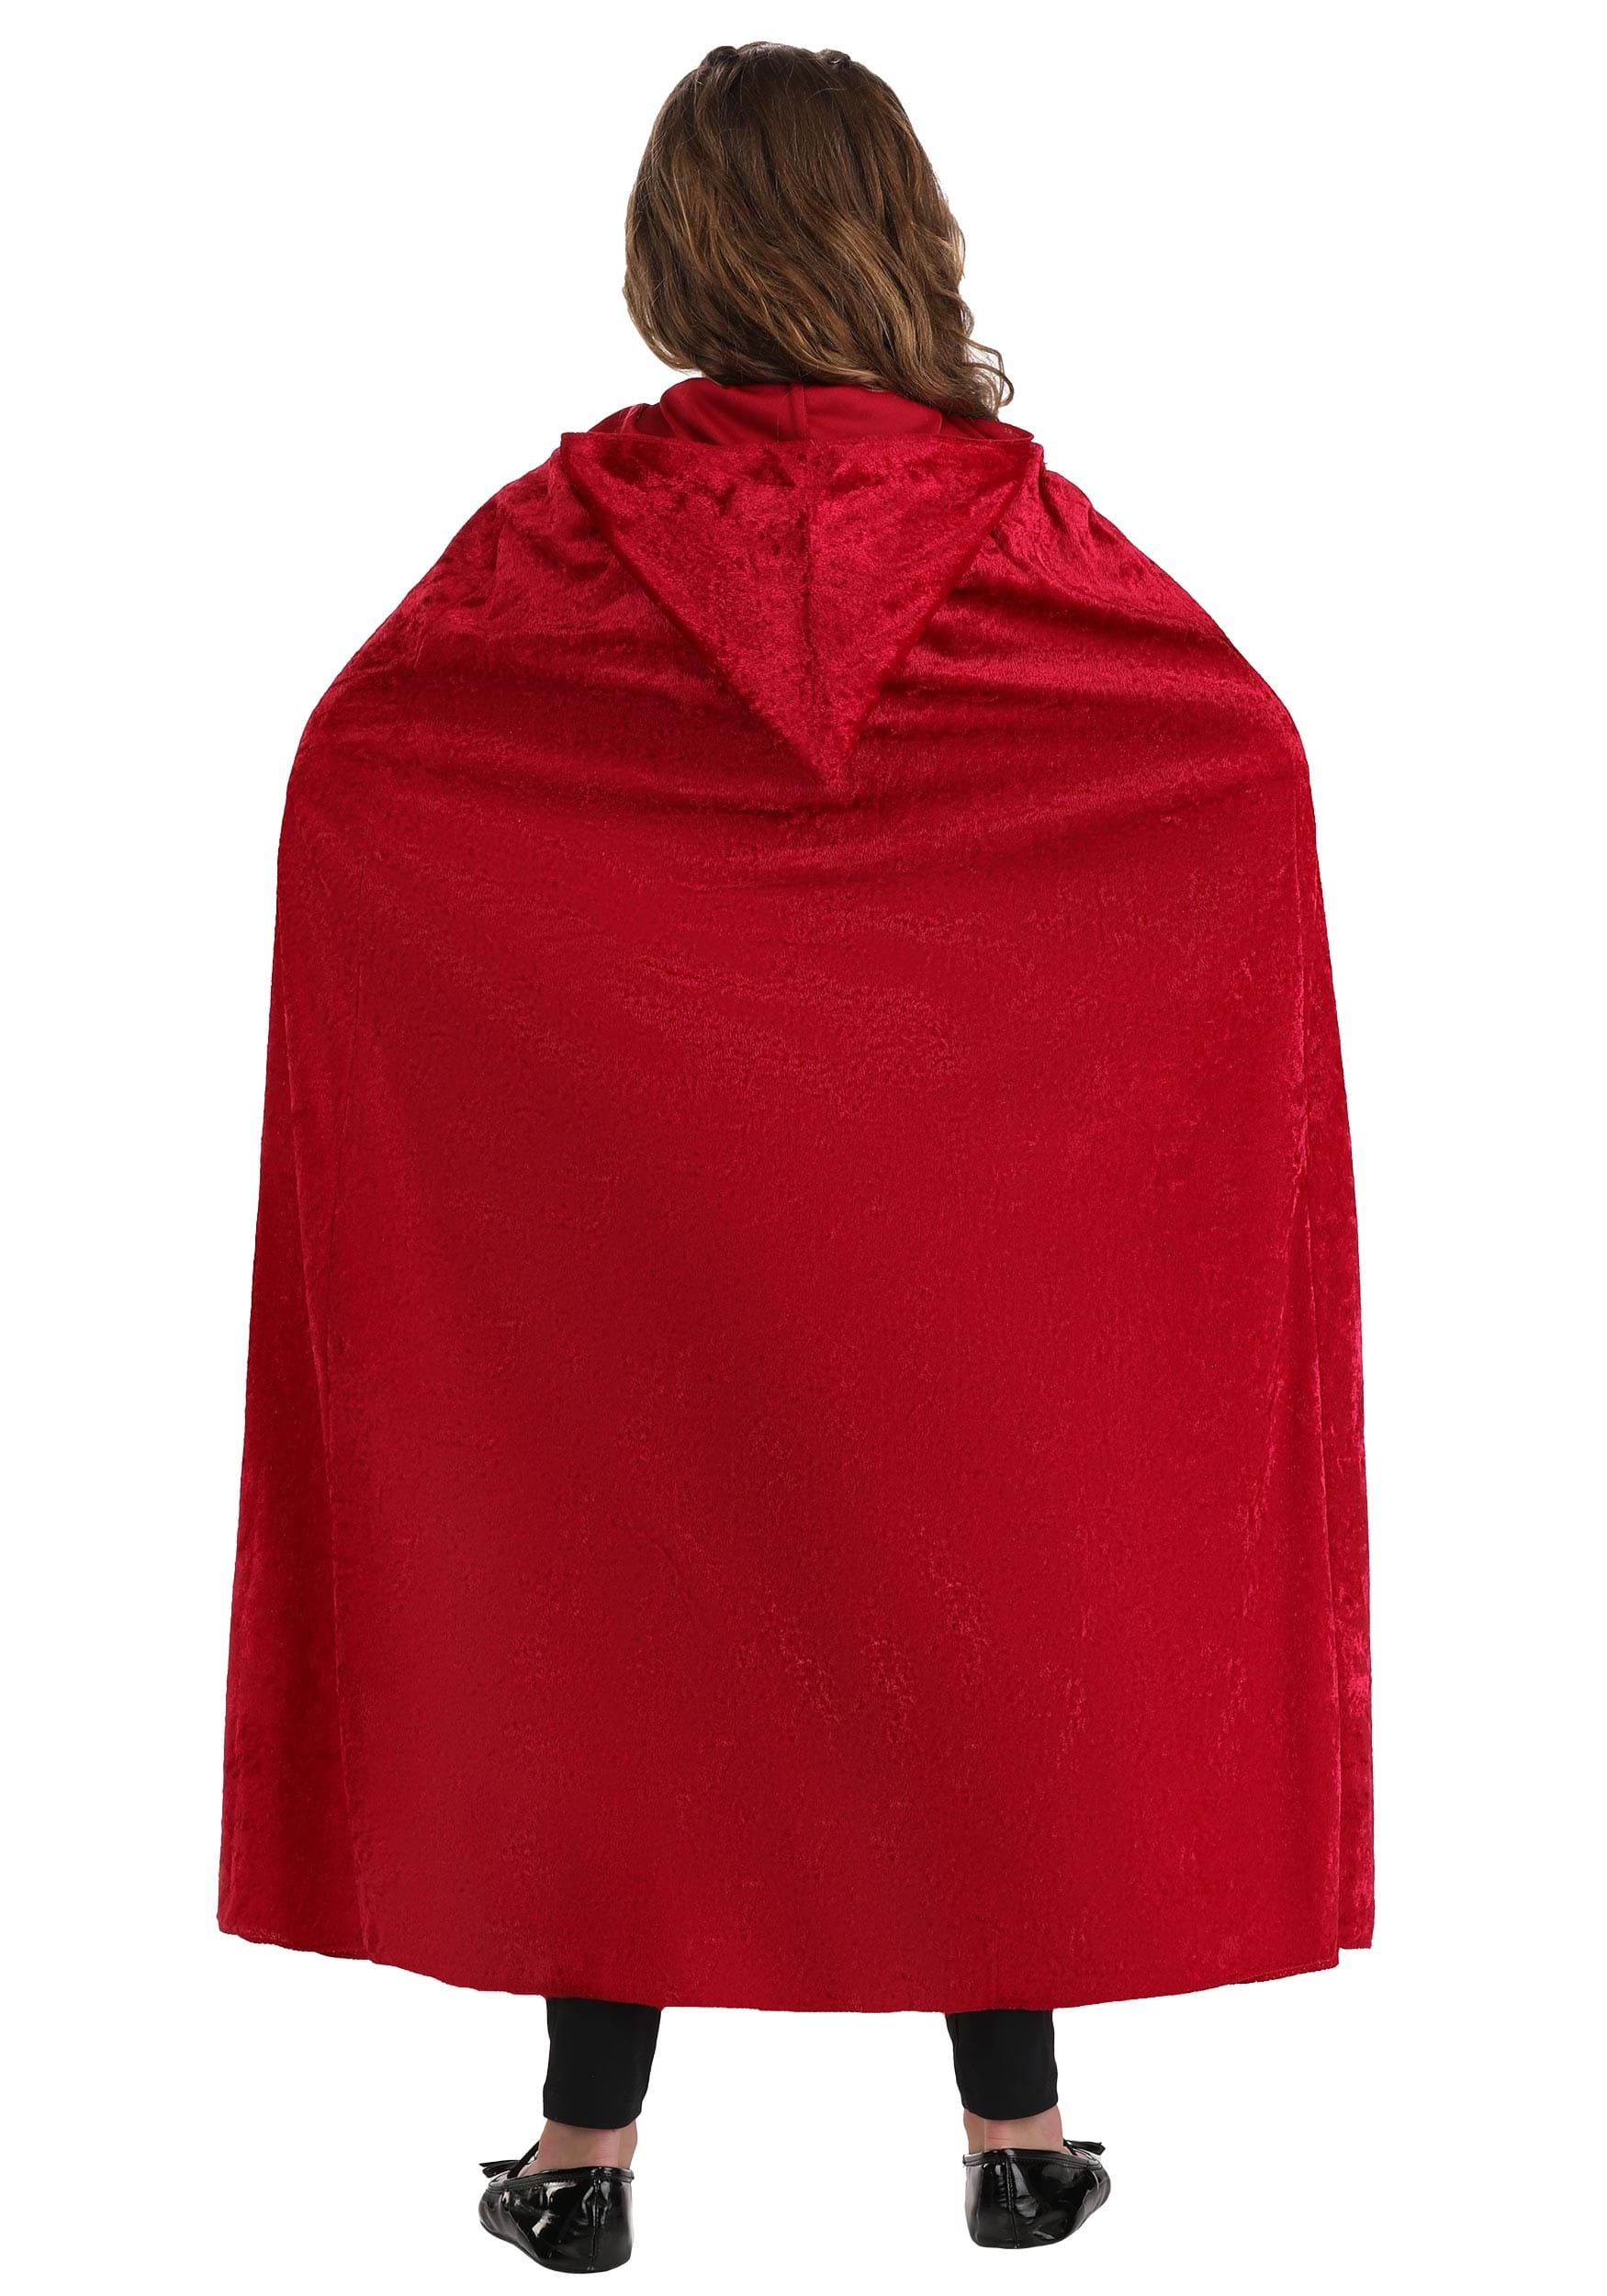 Red Velvet Hooded Kid's Cape , Costume Accessory Capes